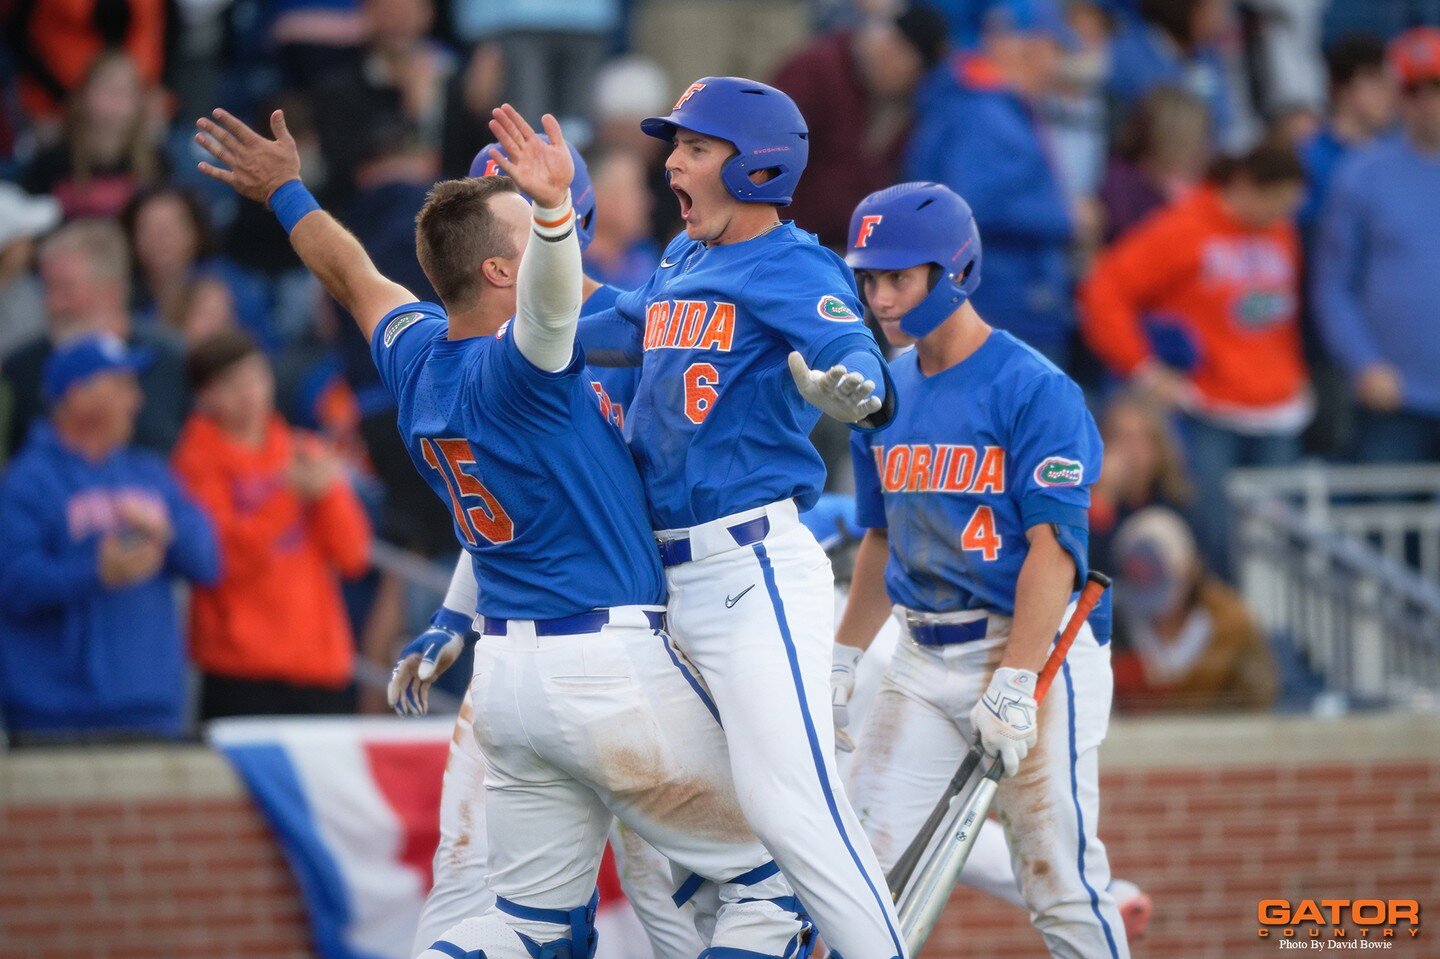 @gatorsbb wins 16-2 over Charleston Southern University! What is your prediction for this year's team??
#gatornation #gatorsbaseball #gogators #gators #baseball